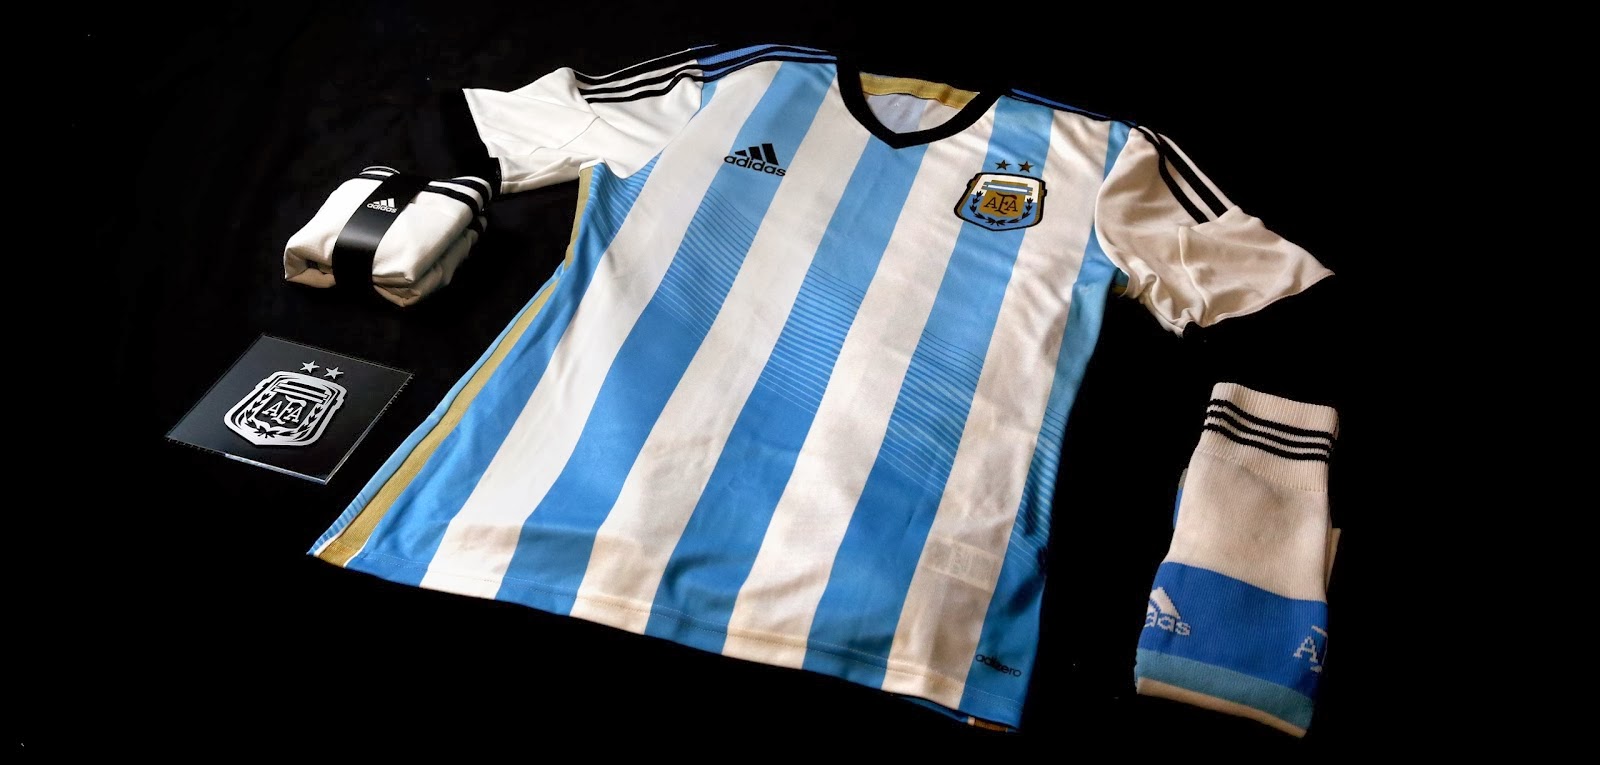 Pro Soccer: adidas Presents The New Argentinean Football Federation Jersey